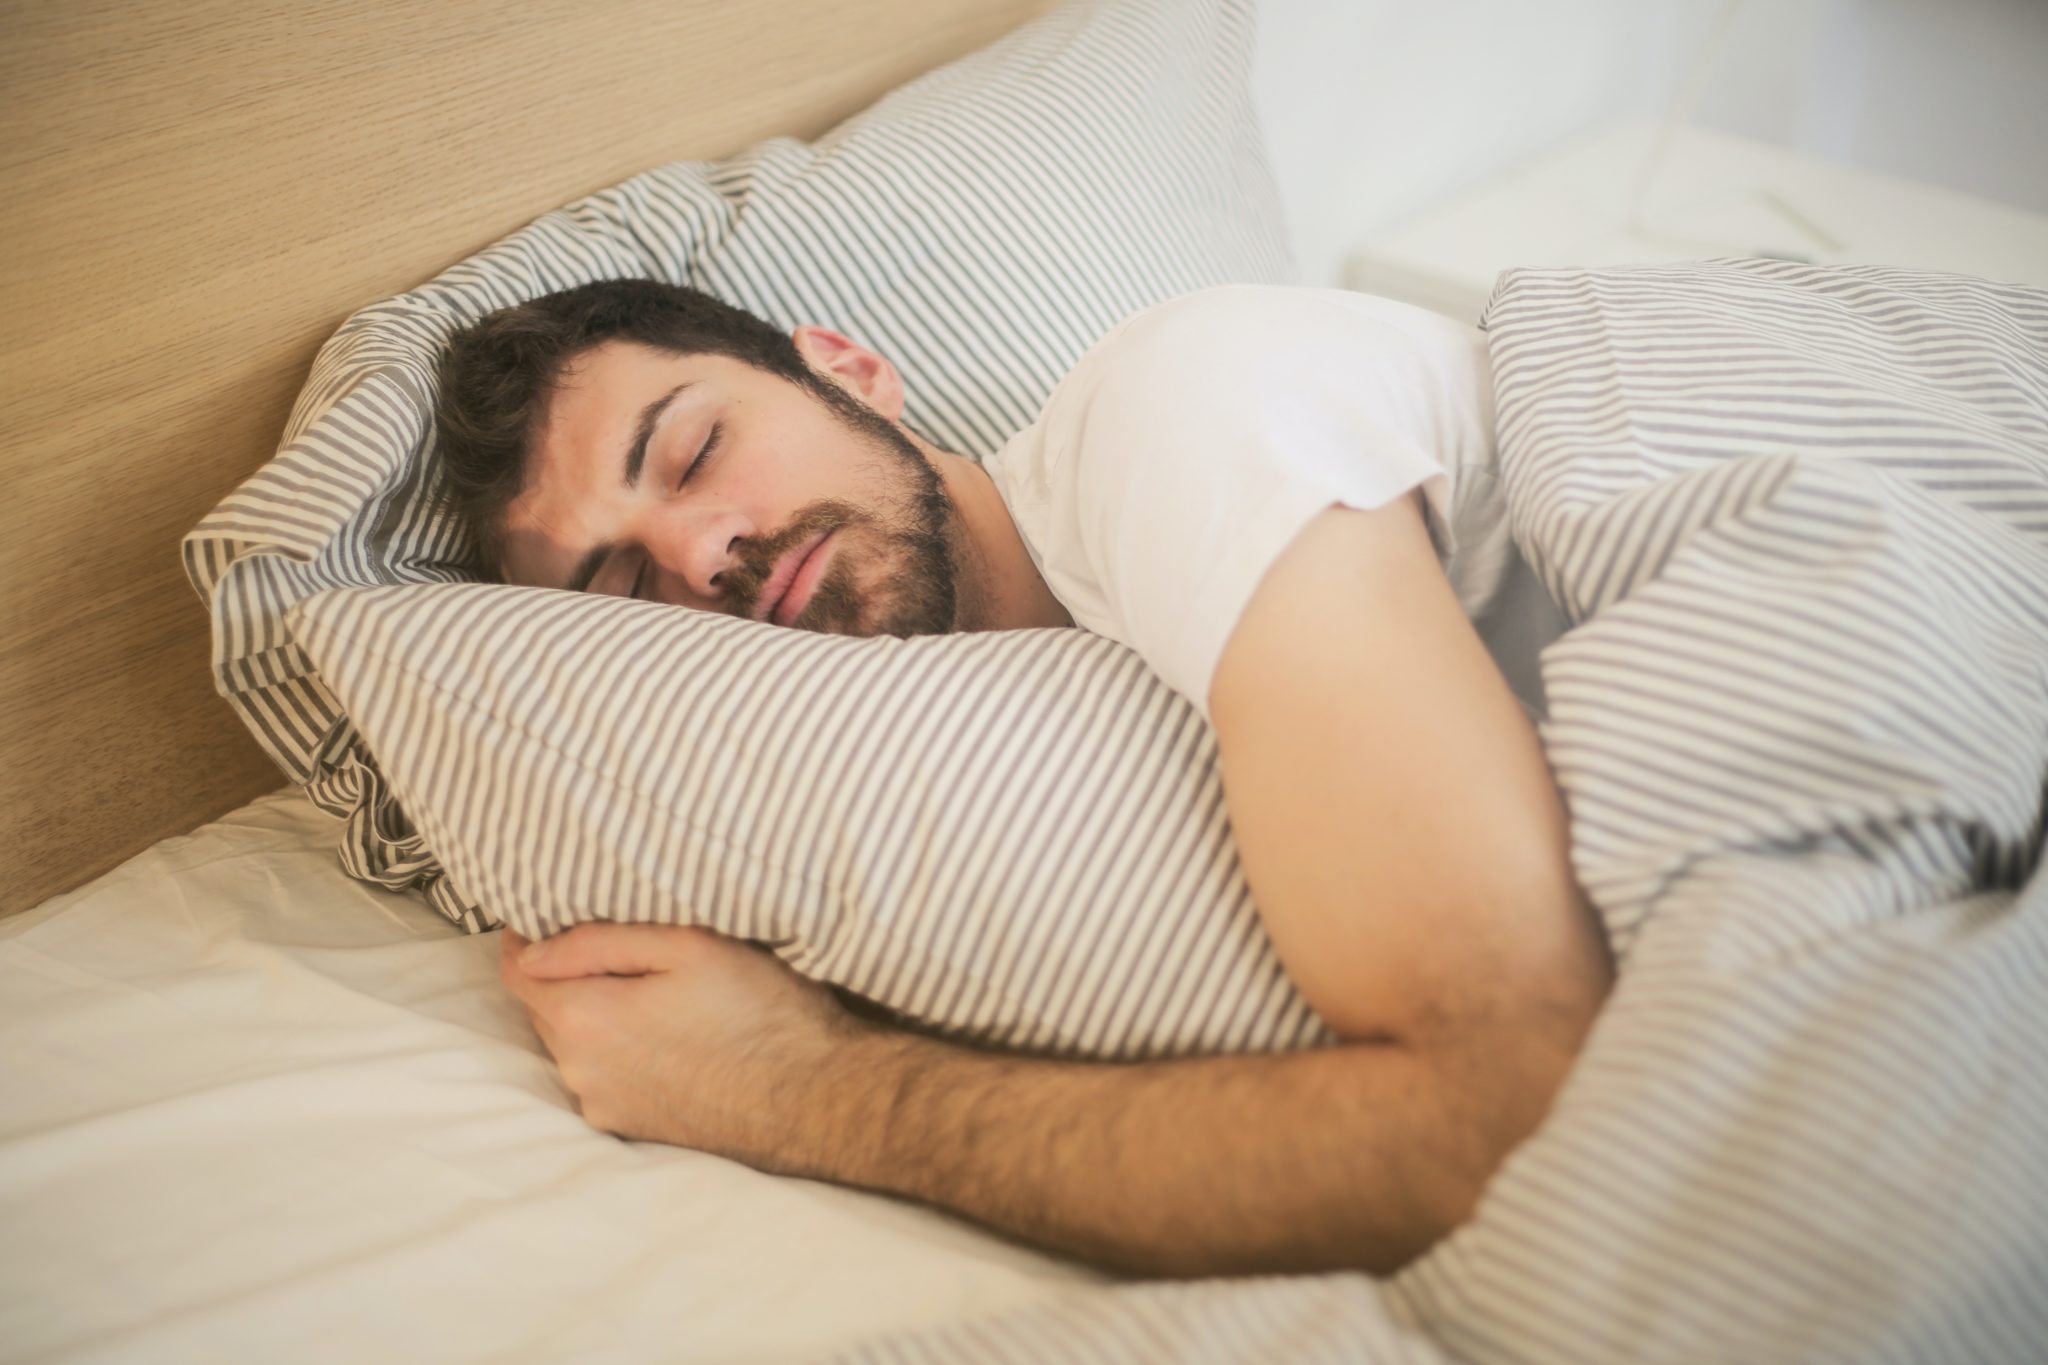 Sleeping Well Improves Memory: Advantages of Being Well-Rested